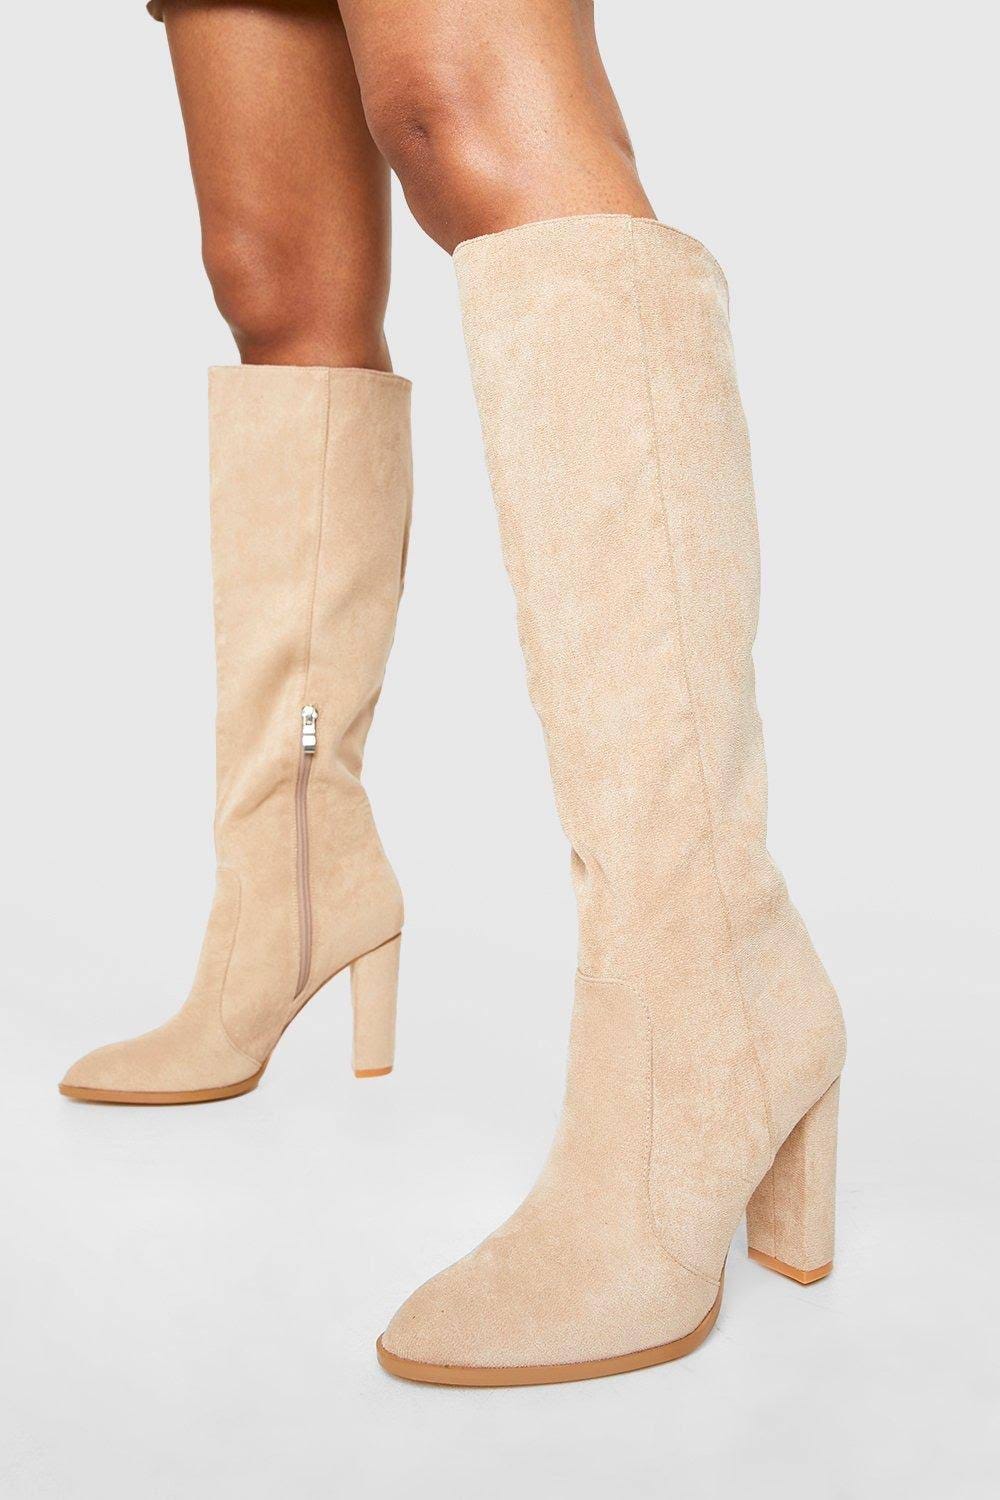 Comfortable Bone Color Knee High Boots | Image